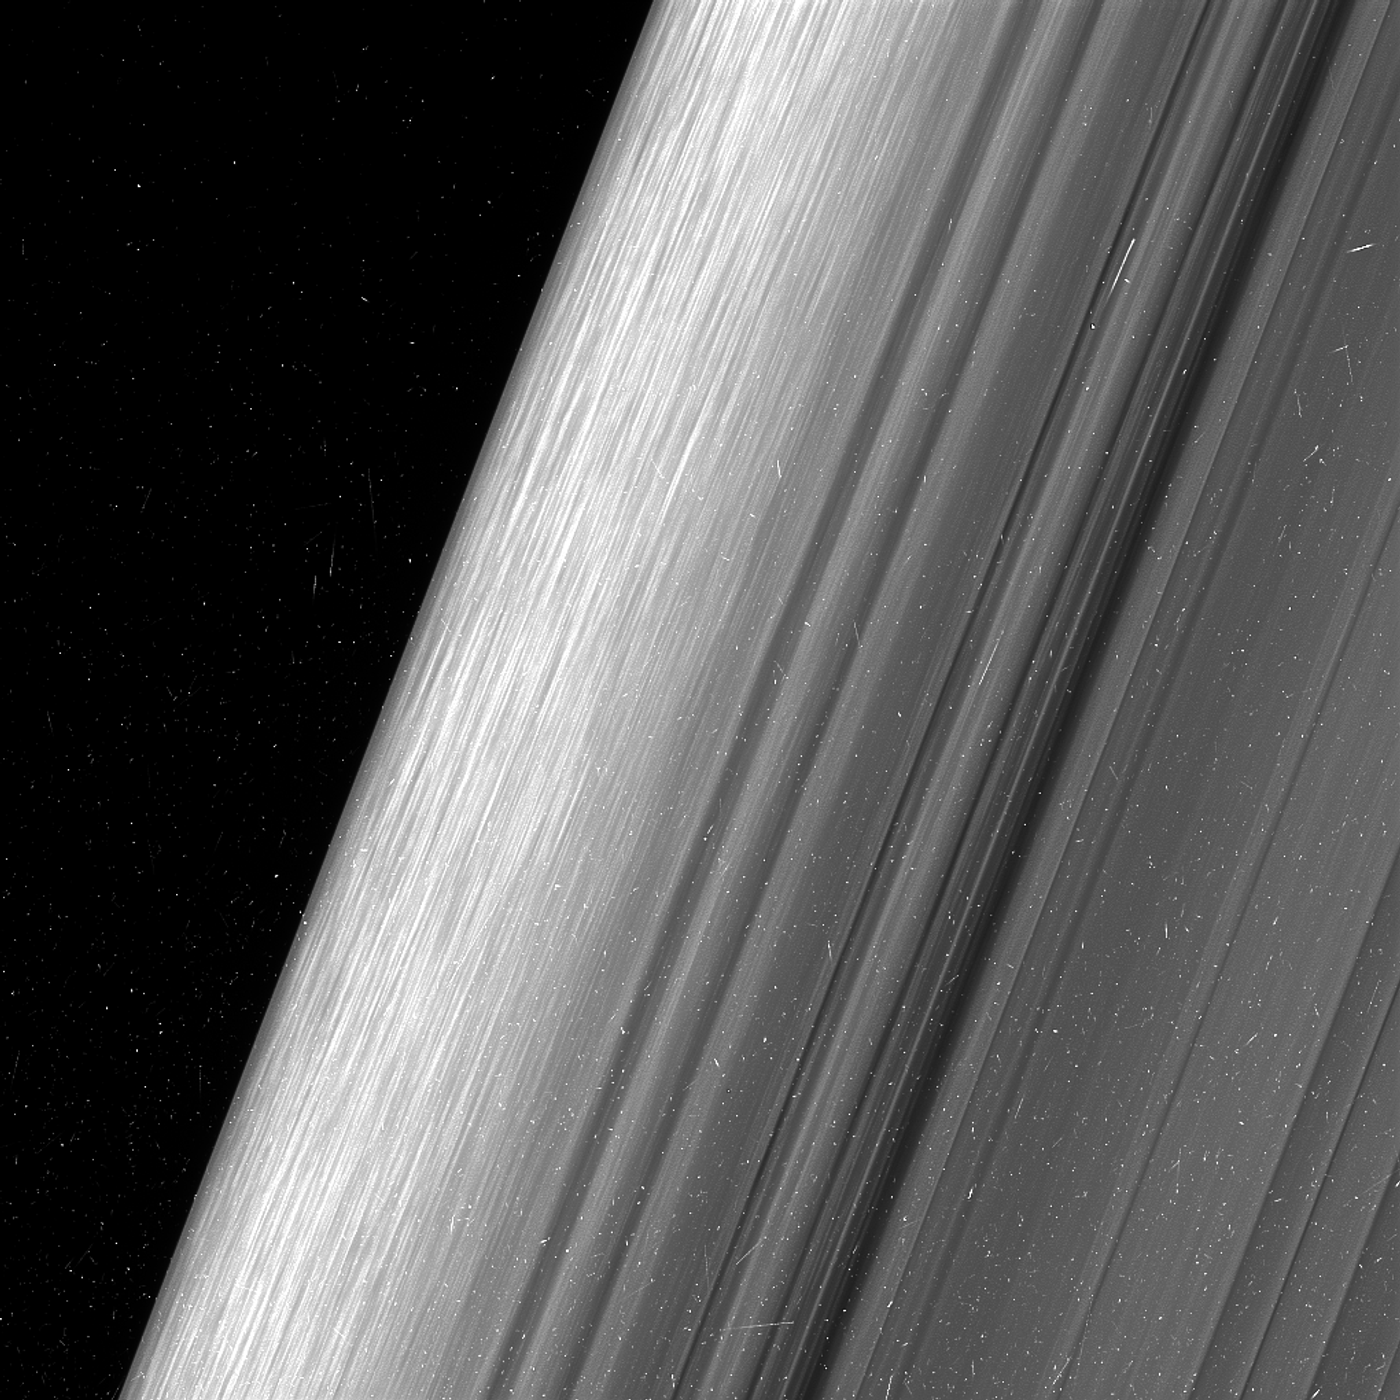 This image shows the horizon of Saturn's outer B ring, and also shows more of the details hidden in the rings.